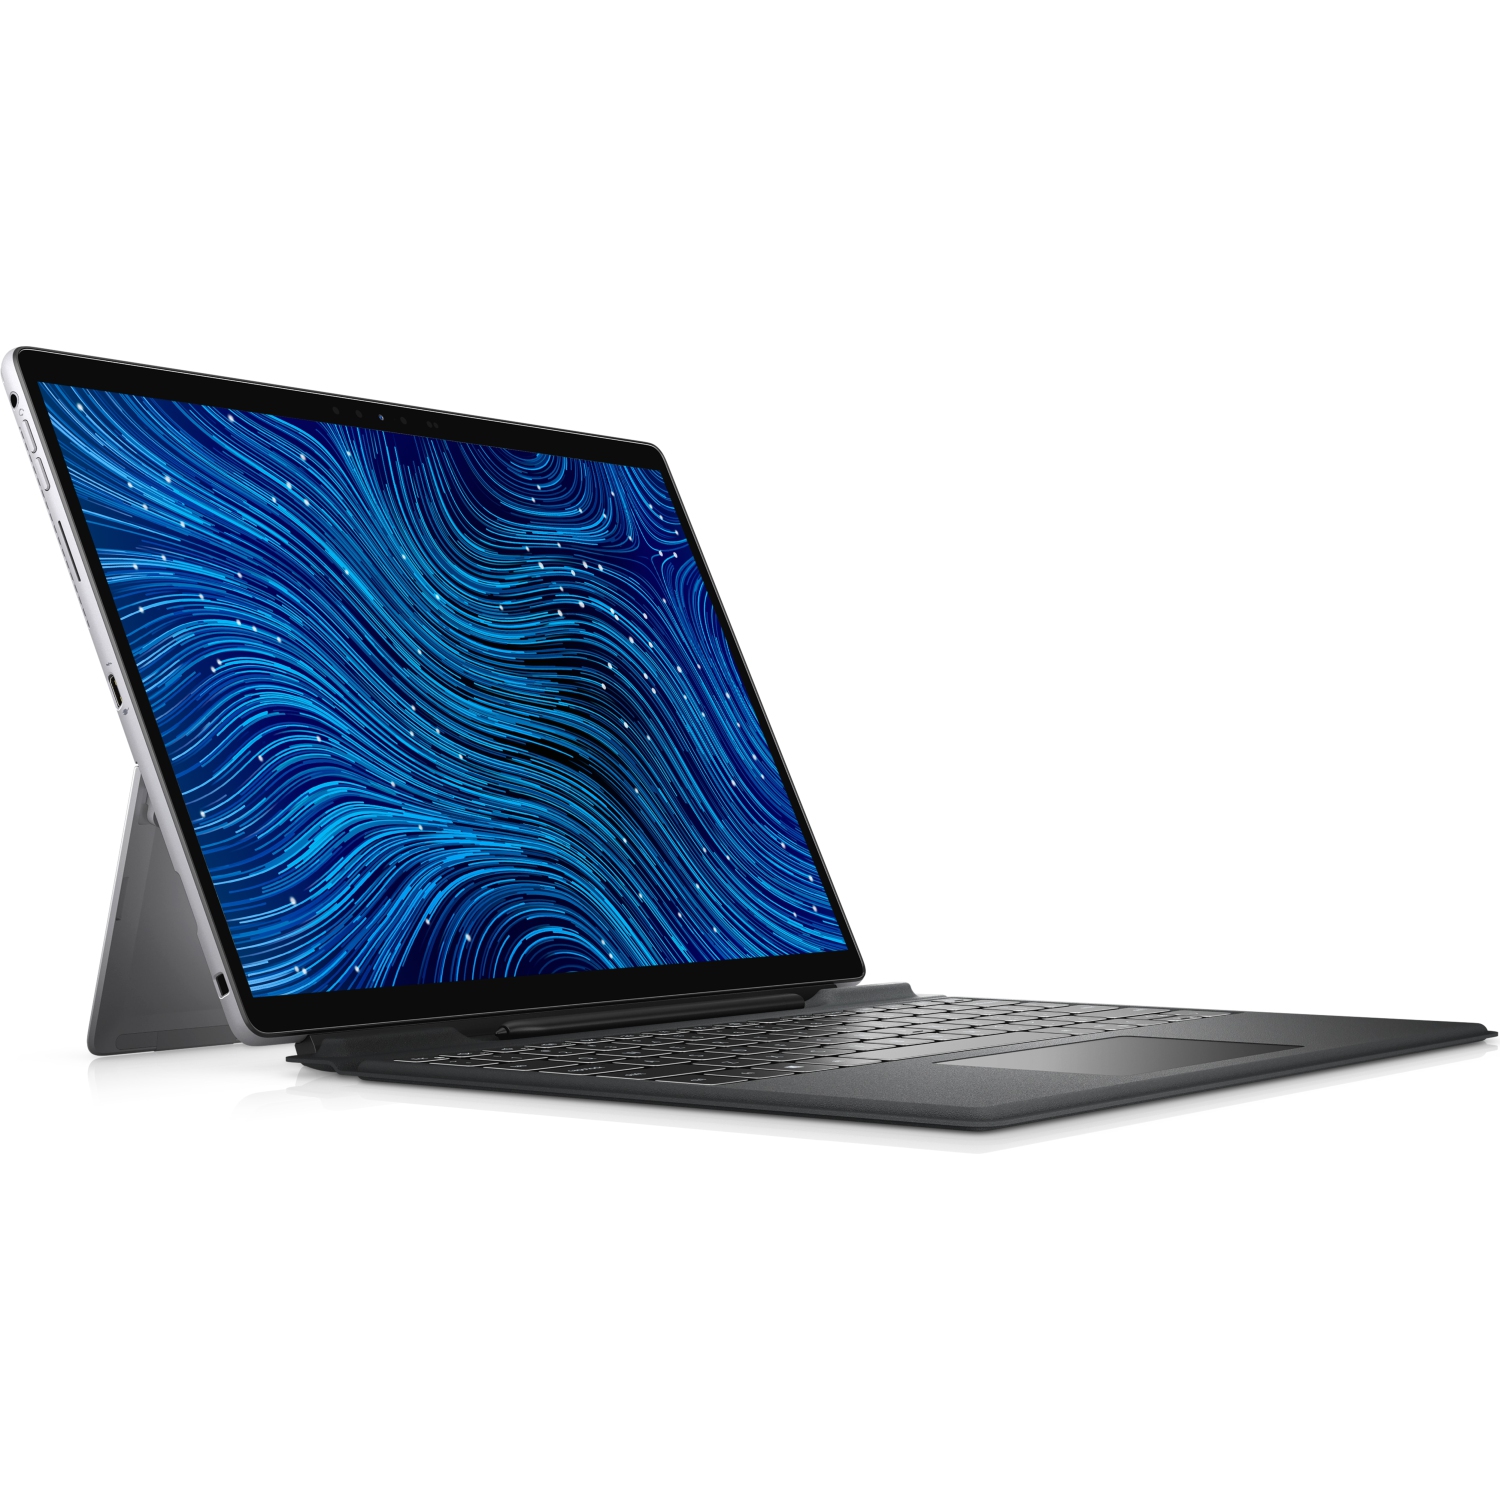 Refurbished (Excellent) – Dell Latitude 7000 7320 Detachable 2-in-1 (2021) | 13" FHD+ Touch | Core i5 - 256GB SSD - 16GB RAM | 4 Cores @ 4.2 GHz - 11th Gen CPU